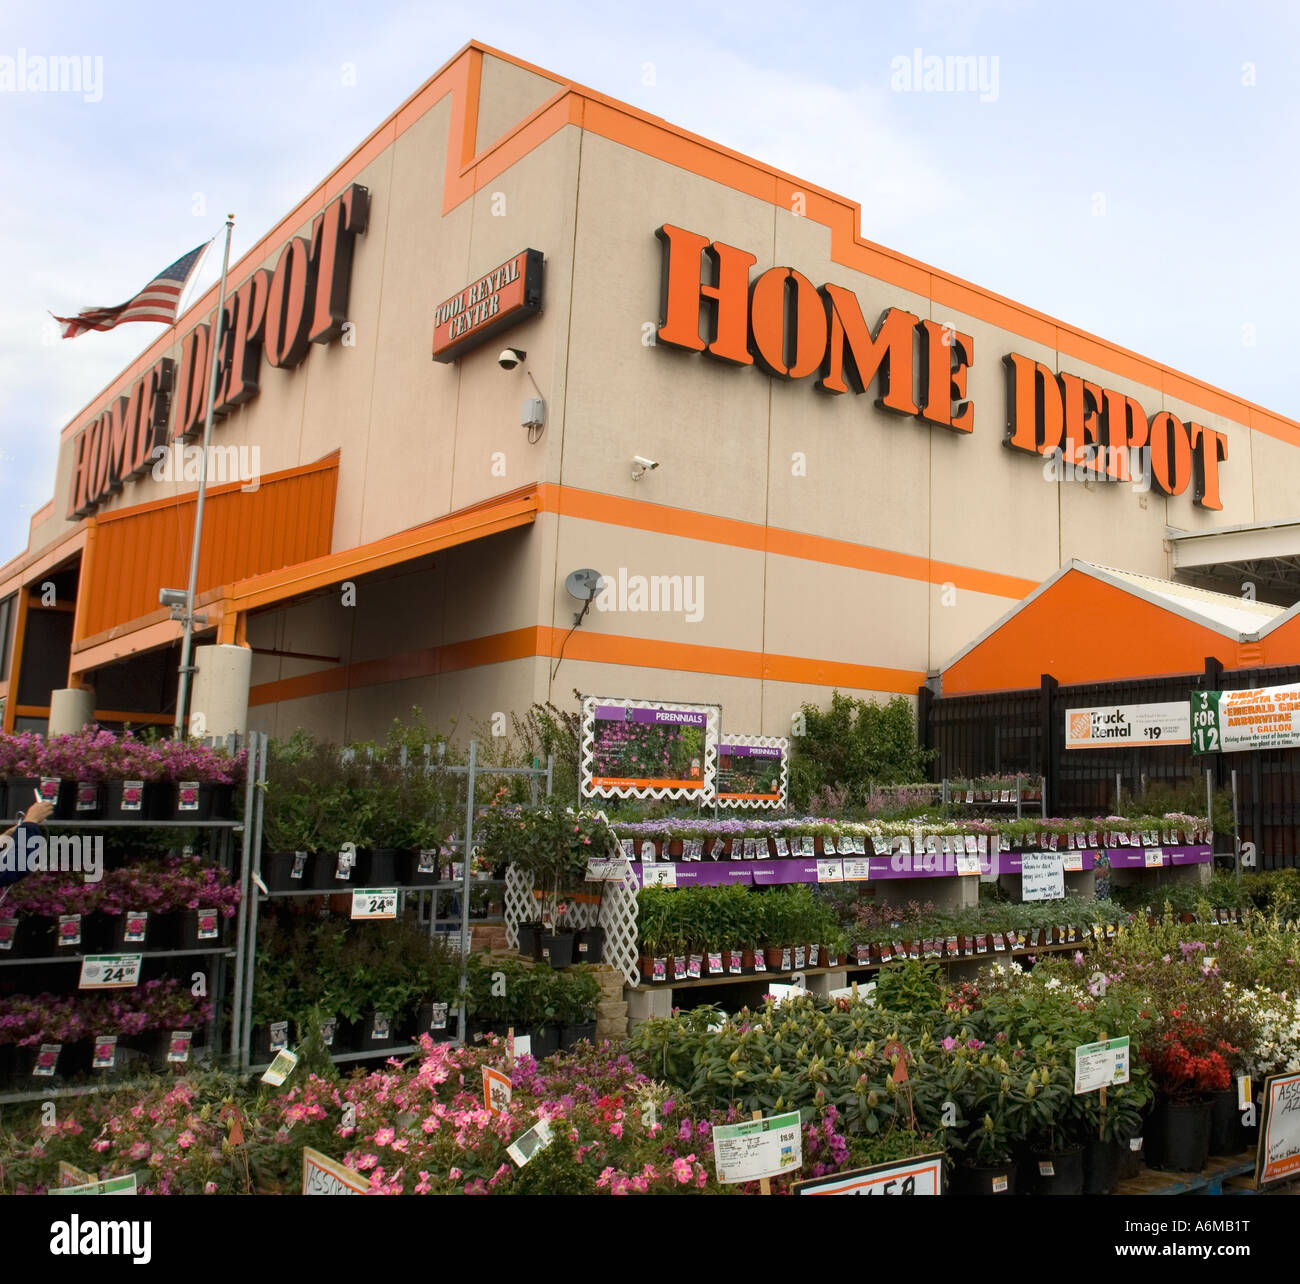 Home Depot Sign And Garden Shop Stock Photo 11606915 Alamy